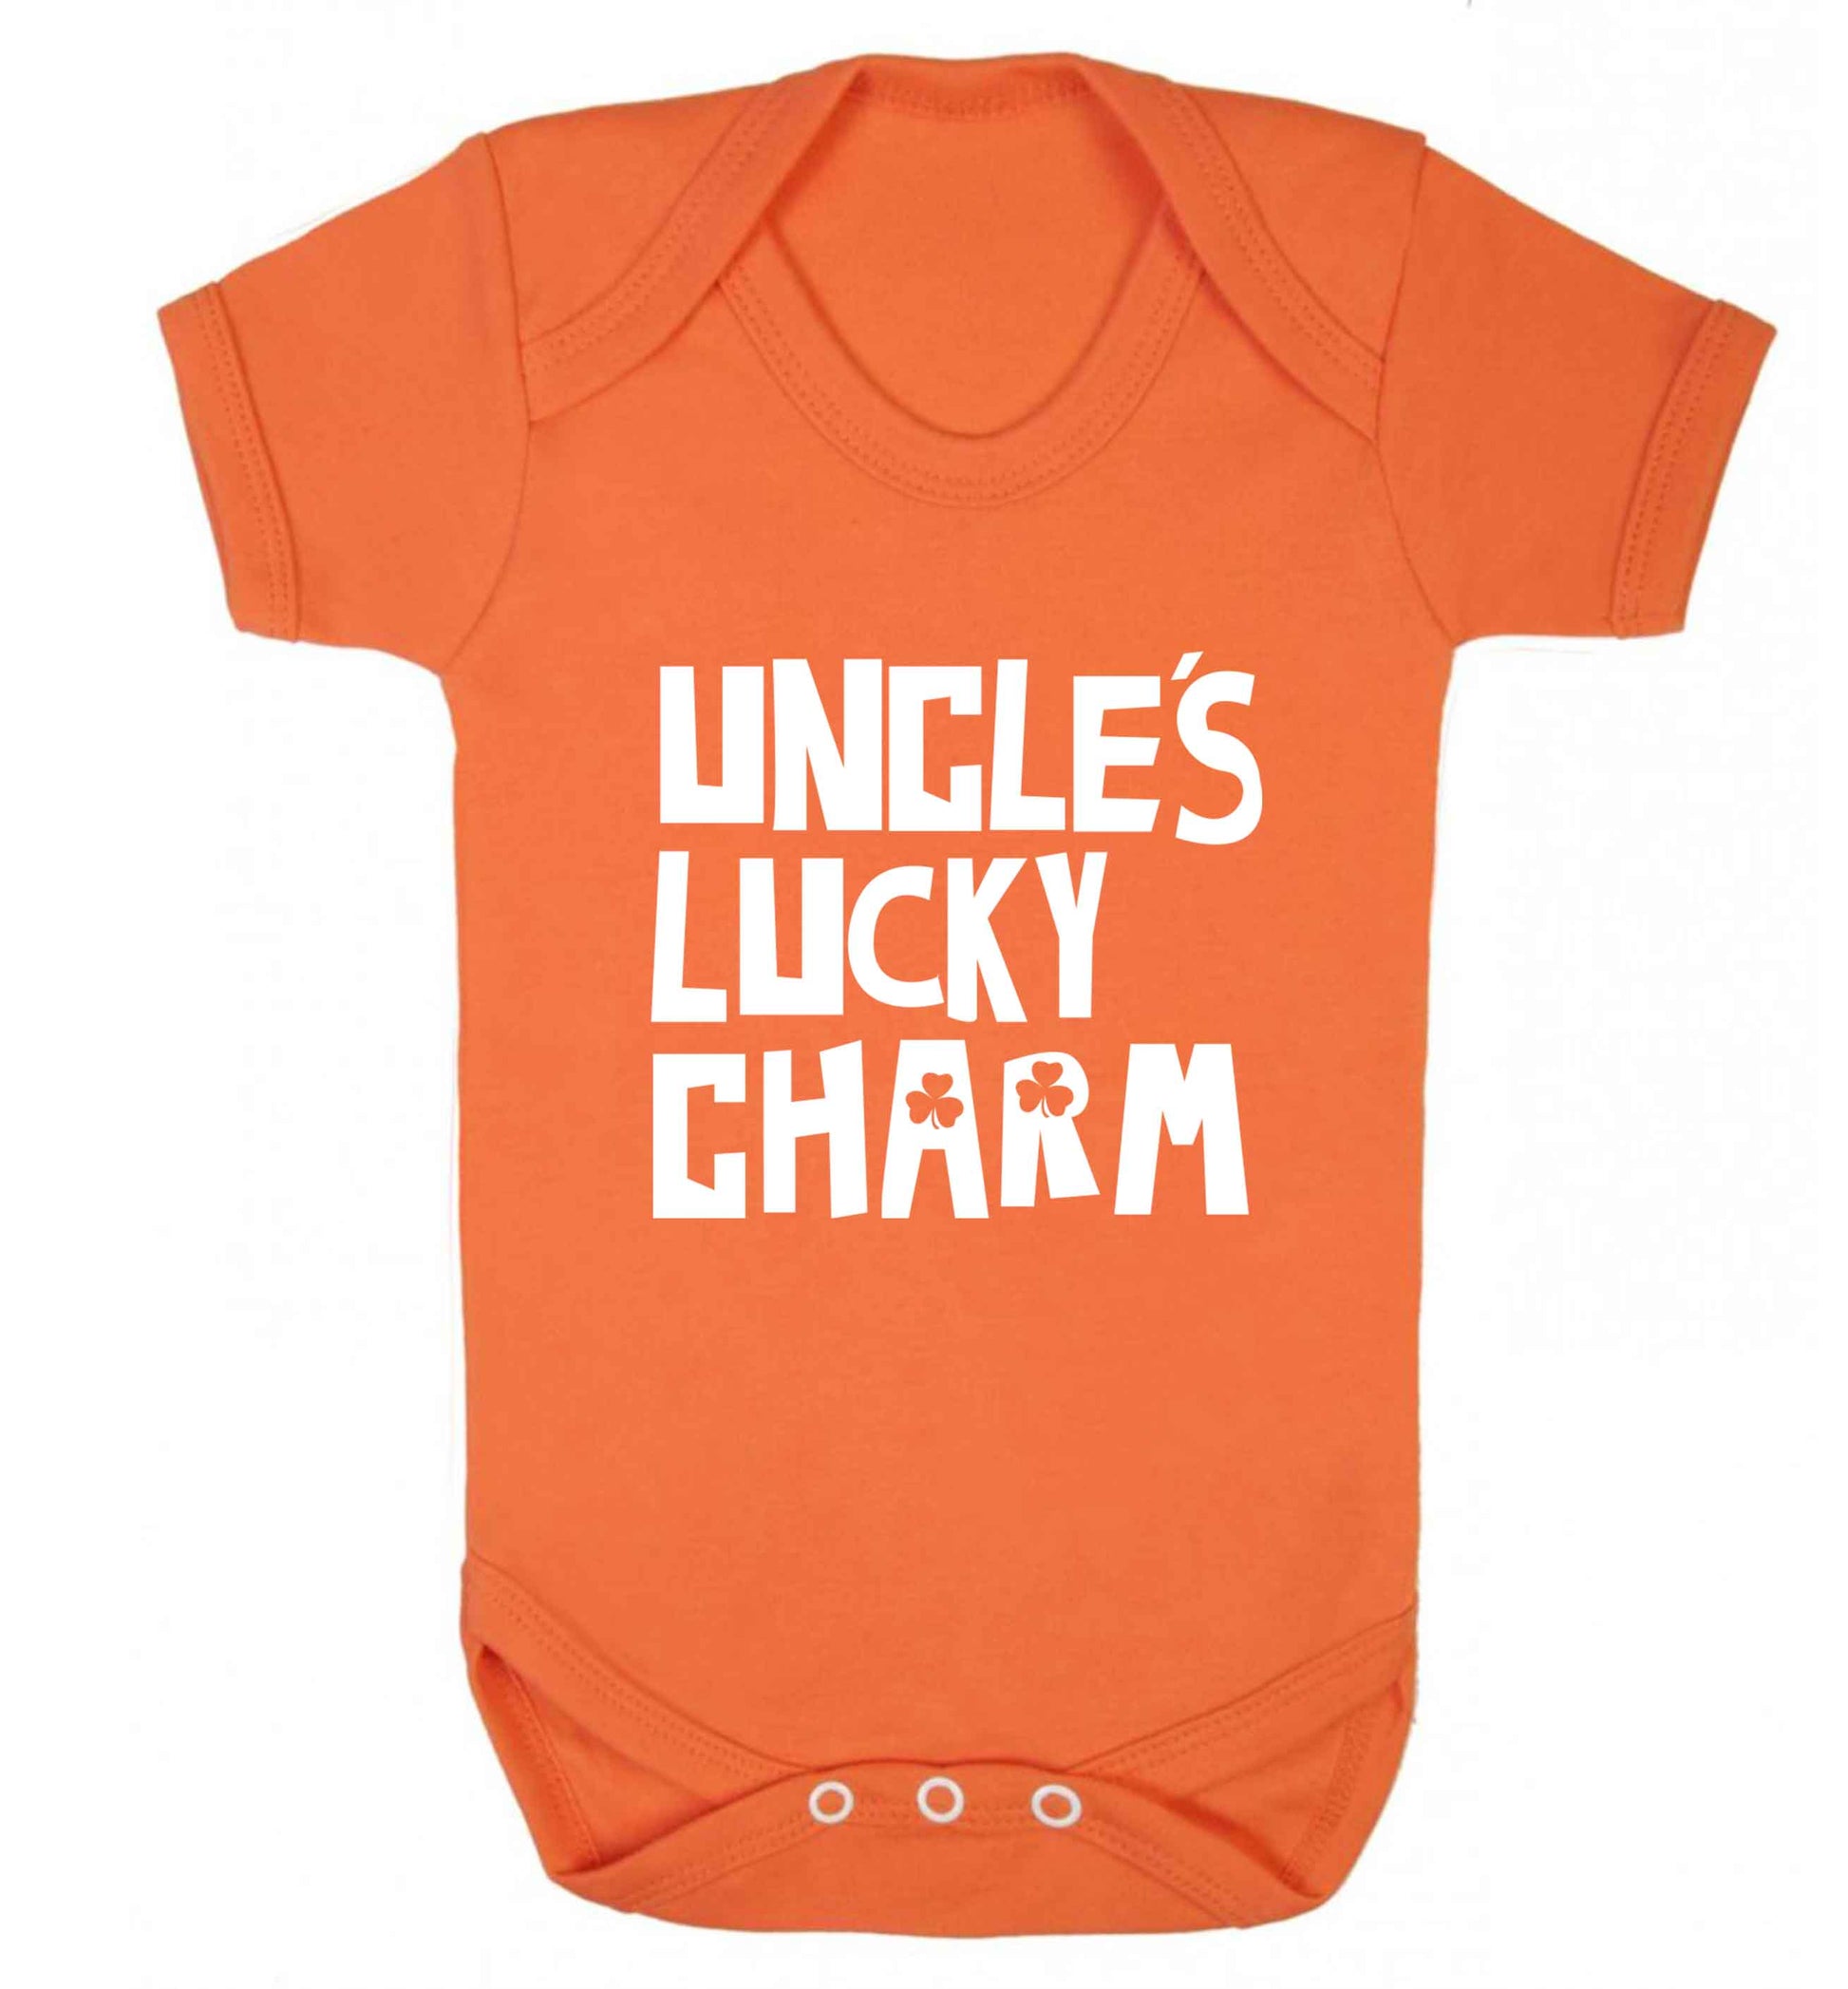 Uncles lucky charm baby vest orange 18-24 months